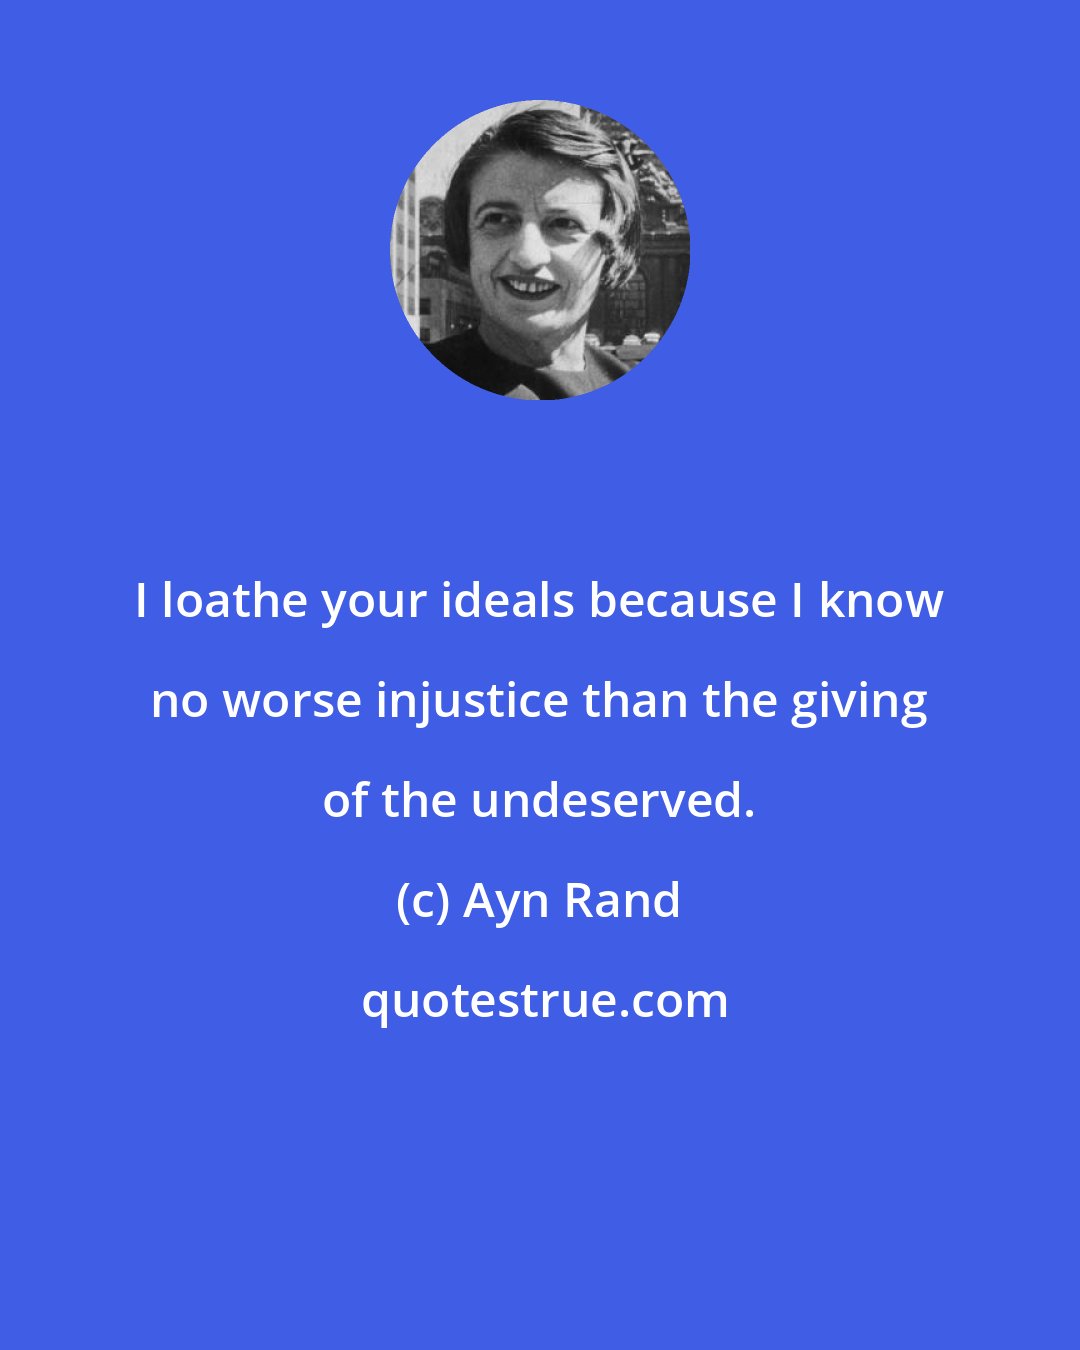 Ayn Rand: I loathe your ideals because I know no worse injustice than the giving of the undeserved.